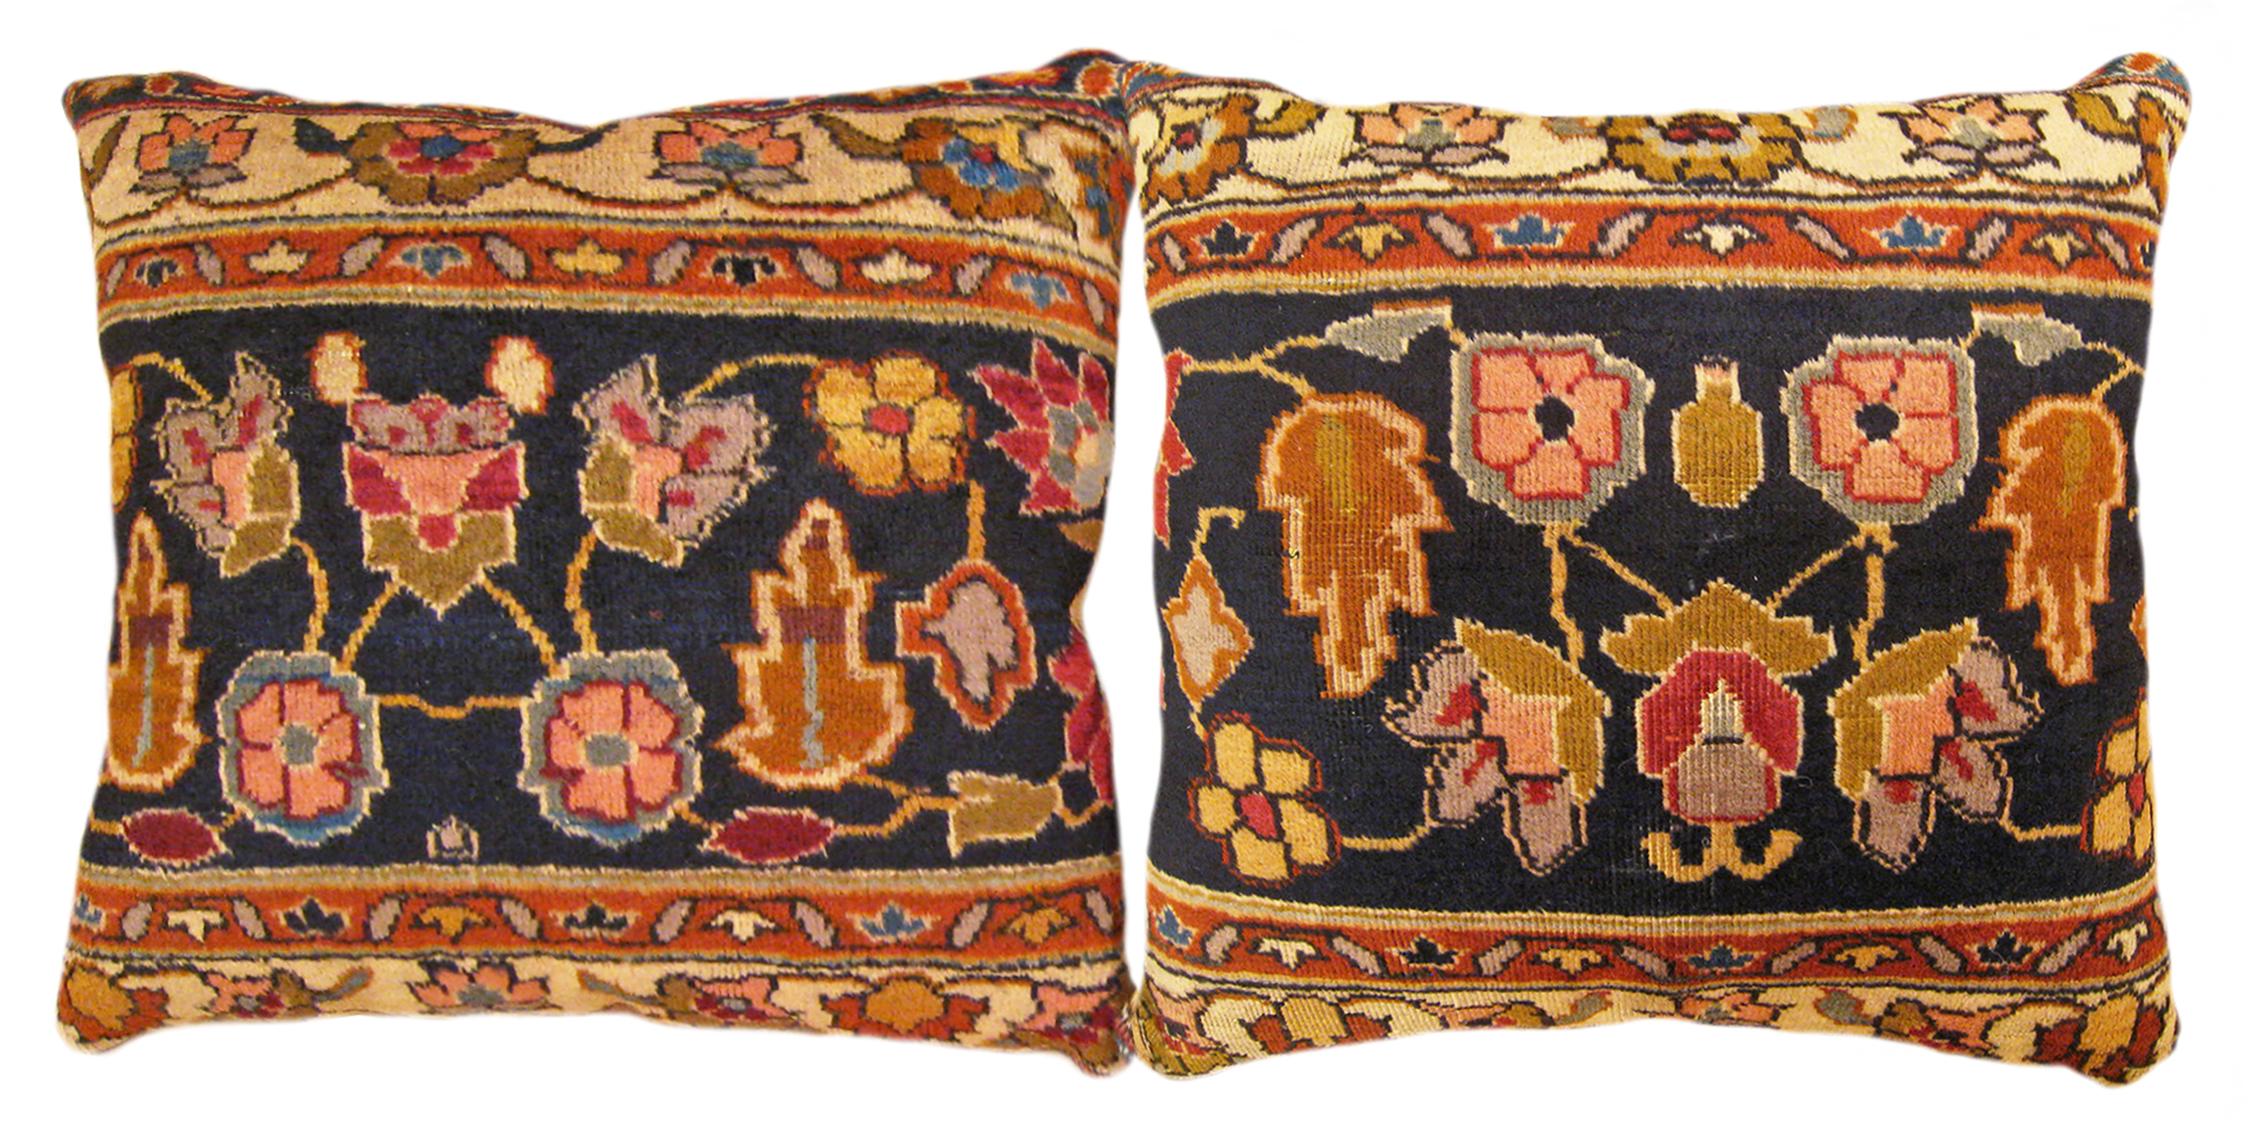 A pair of antique indian agra rug pillows ; size 1'5” x 1'5”

An antique decorative pillows with floral elements allover a blue central field, size  1'5” x 1'5”.  This lovely decorative pillow features an antique fabric of a Agra rug on front which